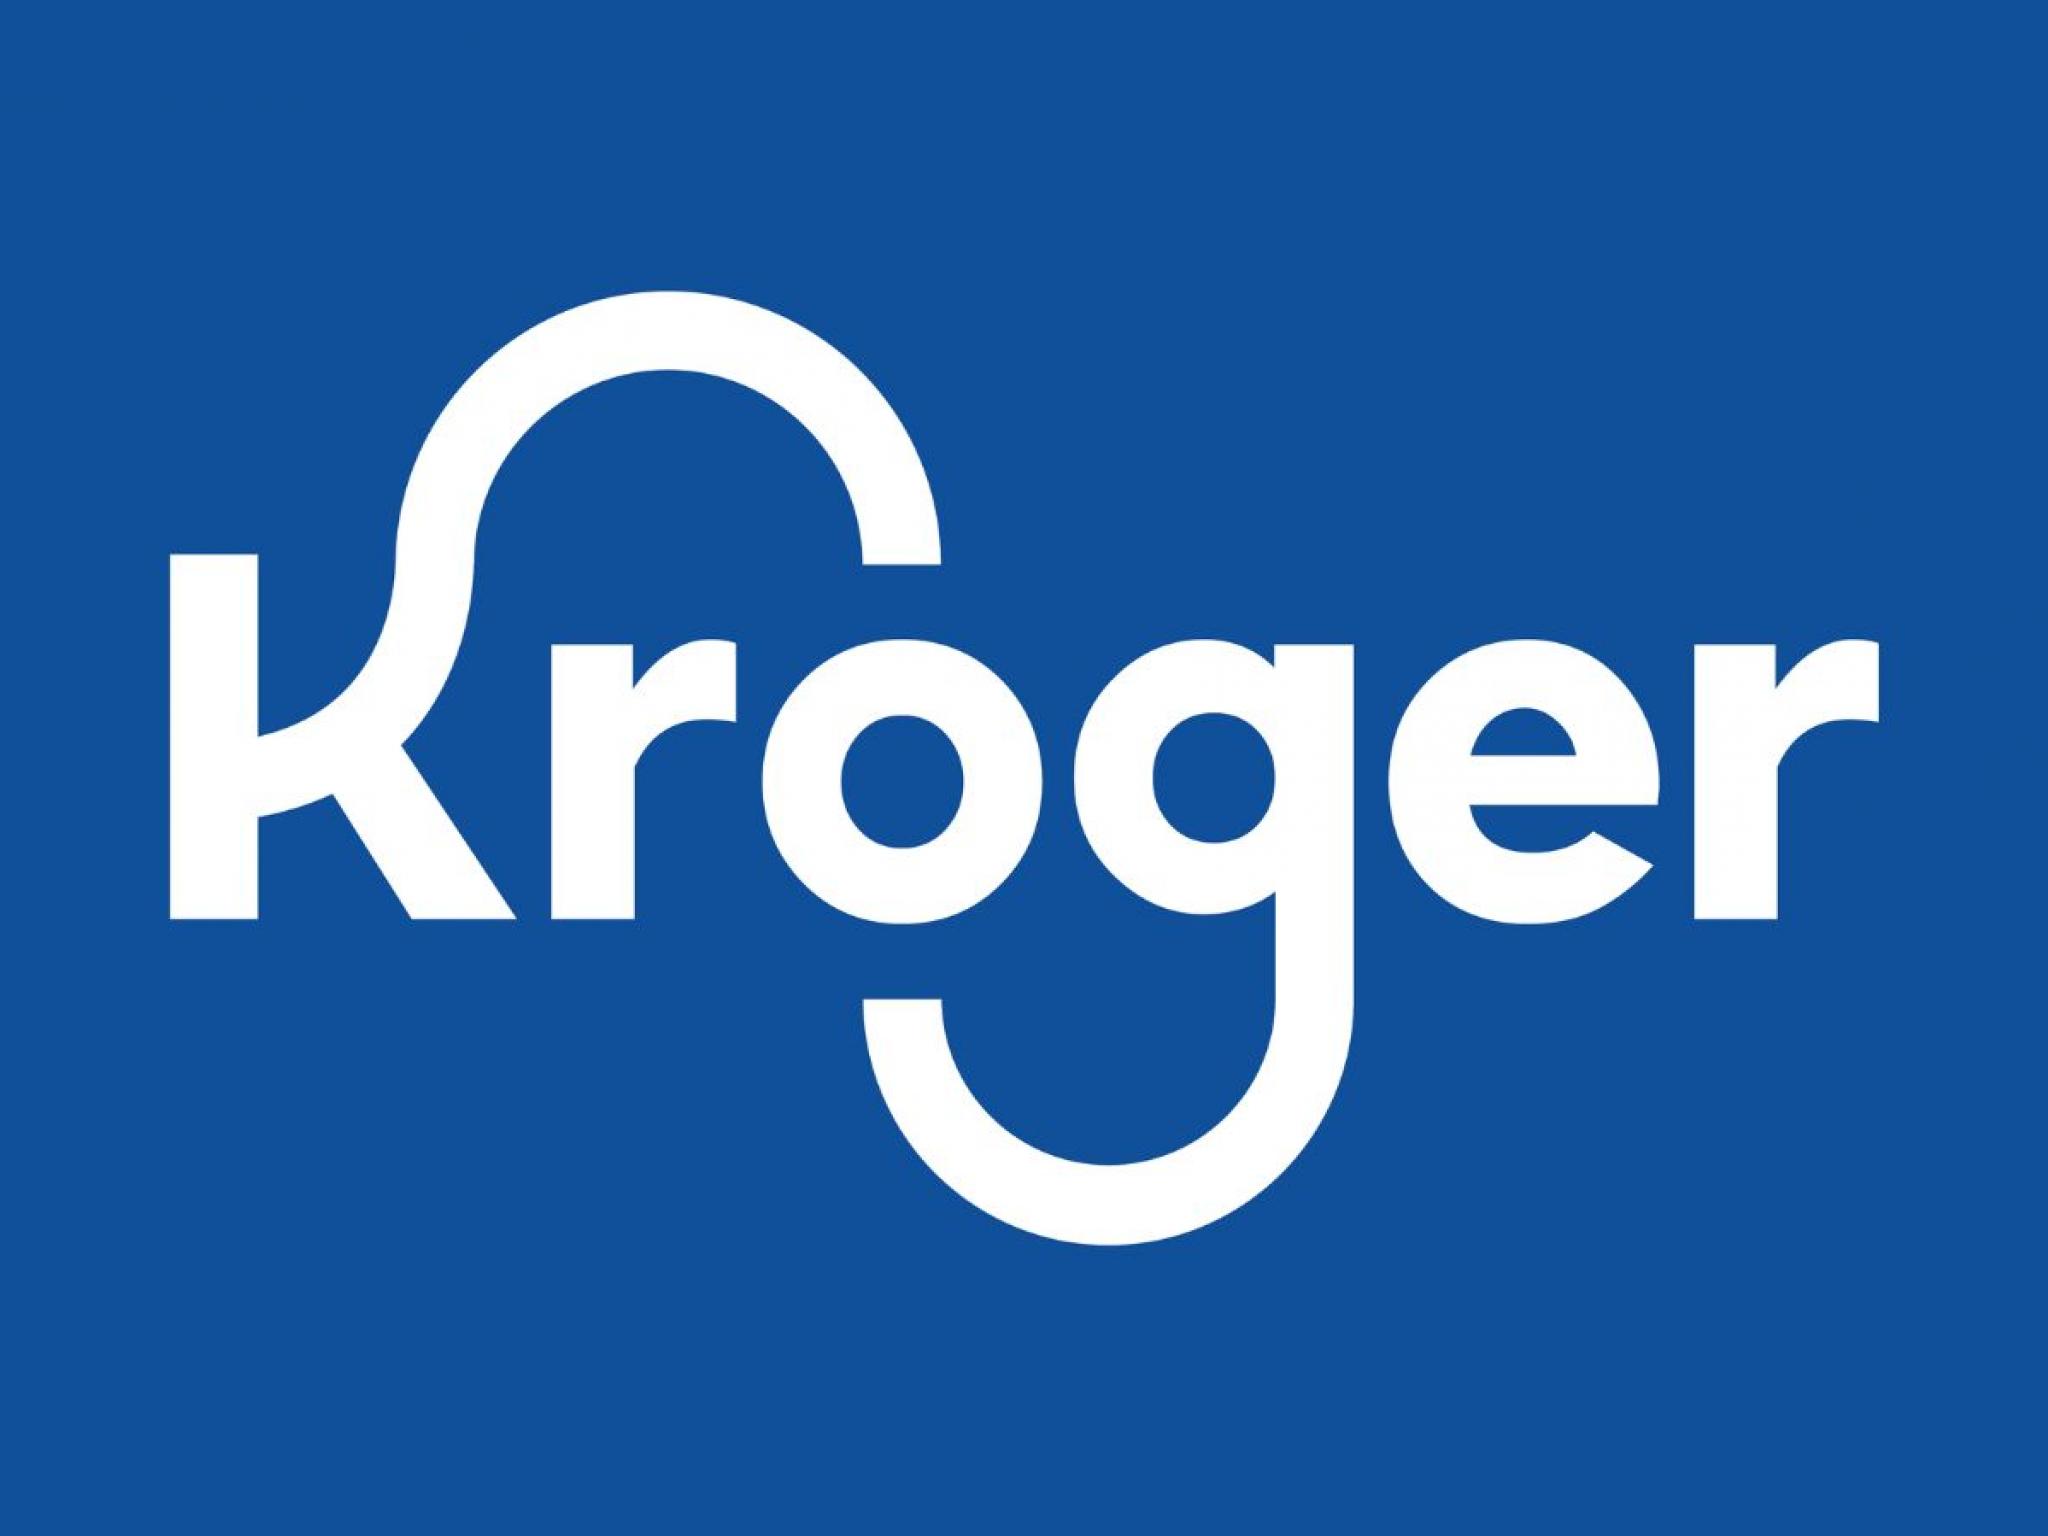  kroger-dell-and-3-stocks-to-watch-heading-into-thursday 